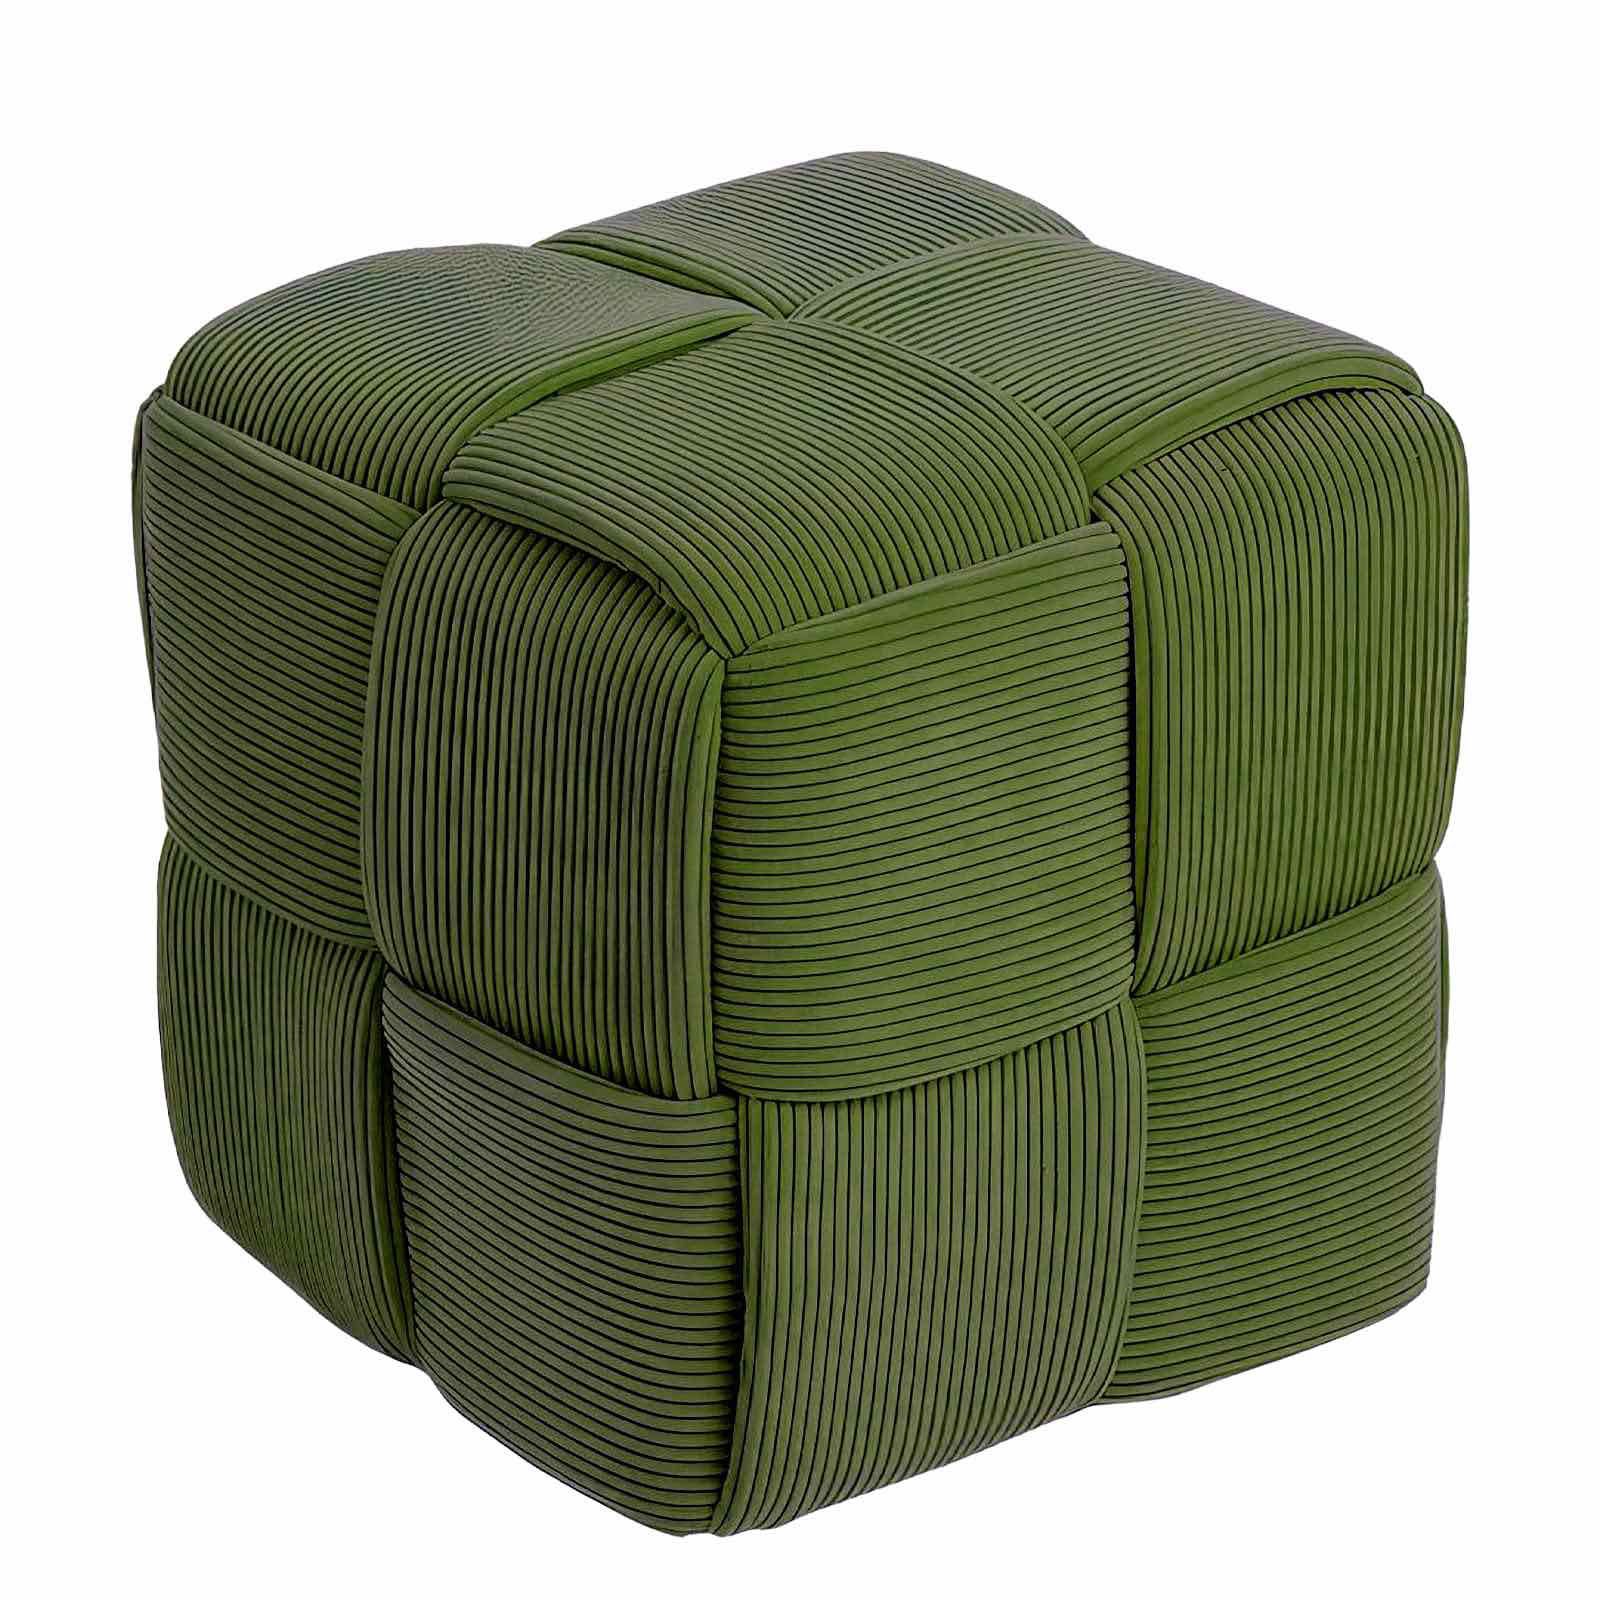 Cmishe Ottoman Foot Rest Soft and Comfortable Ottoman Square Corduroy Woven Design Sofa Stool (Green)